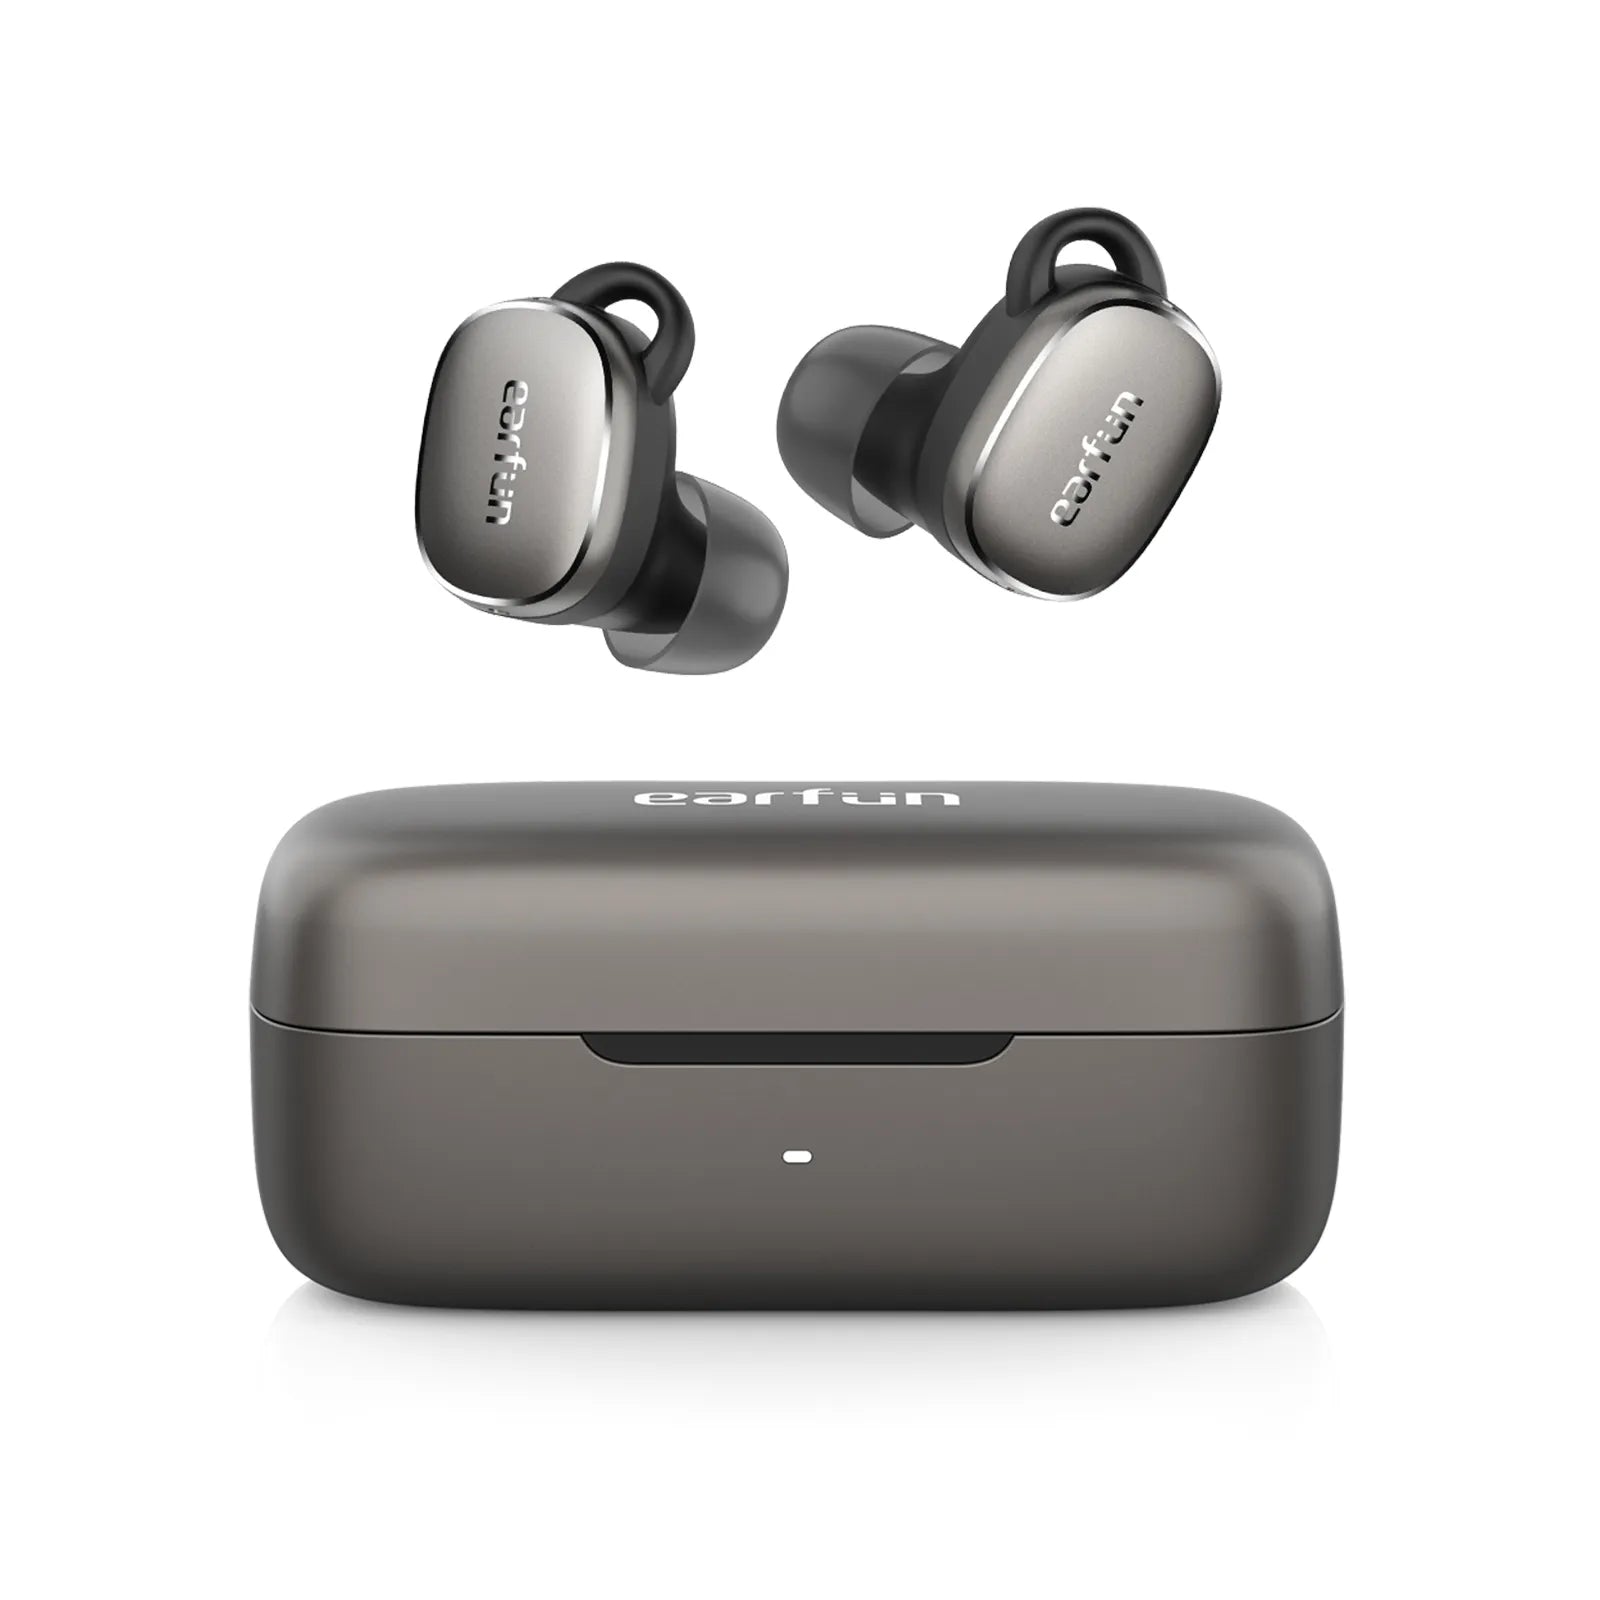 EarFun Free Pro 3 Active Noise Cancelling Wireless Earbuds